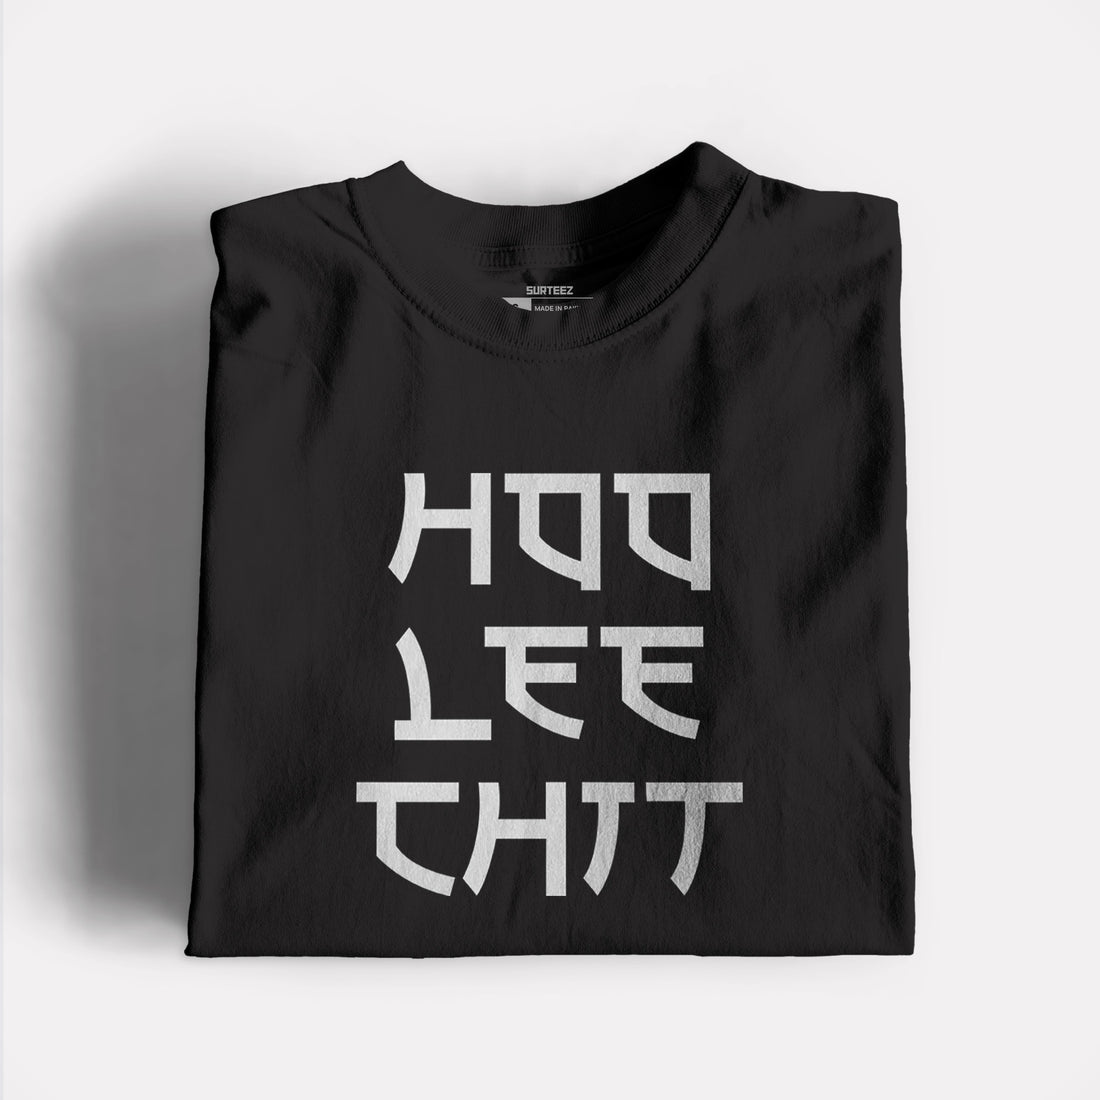 Holee Shit Graphic Tee